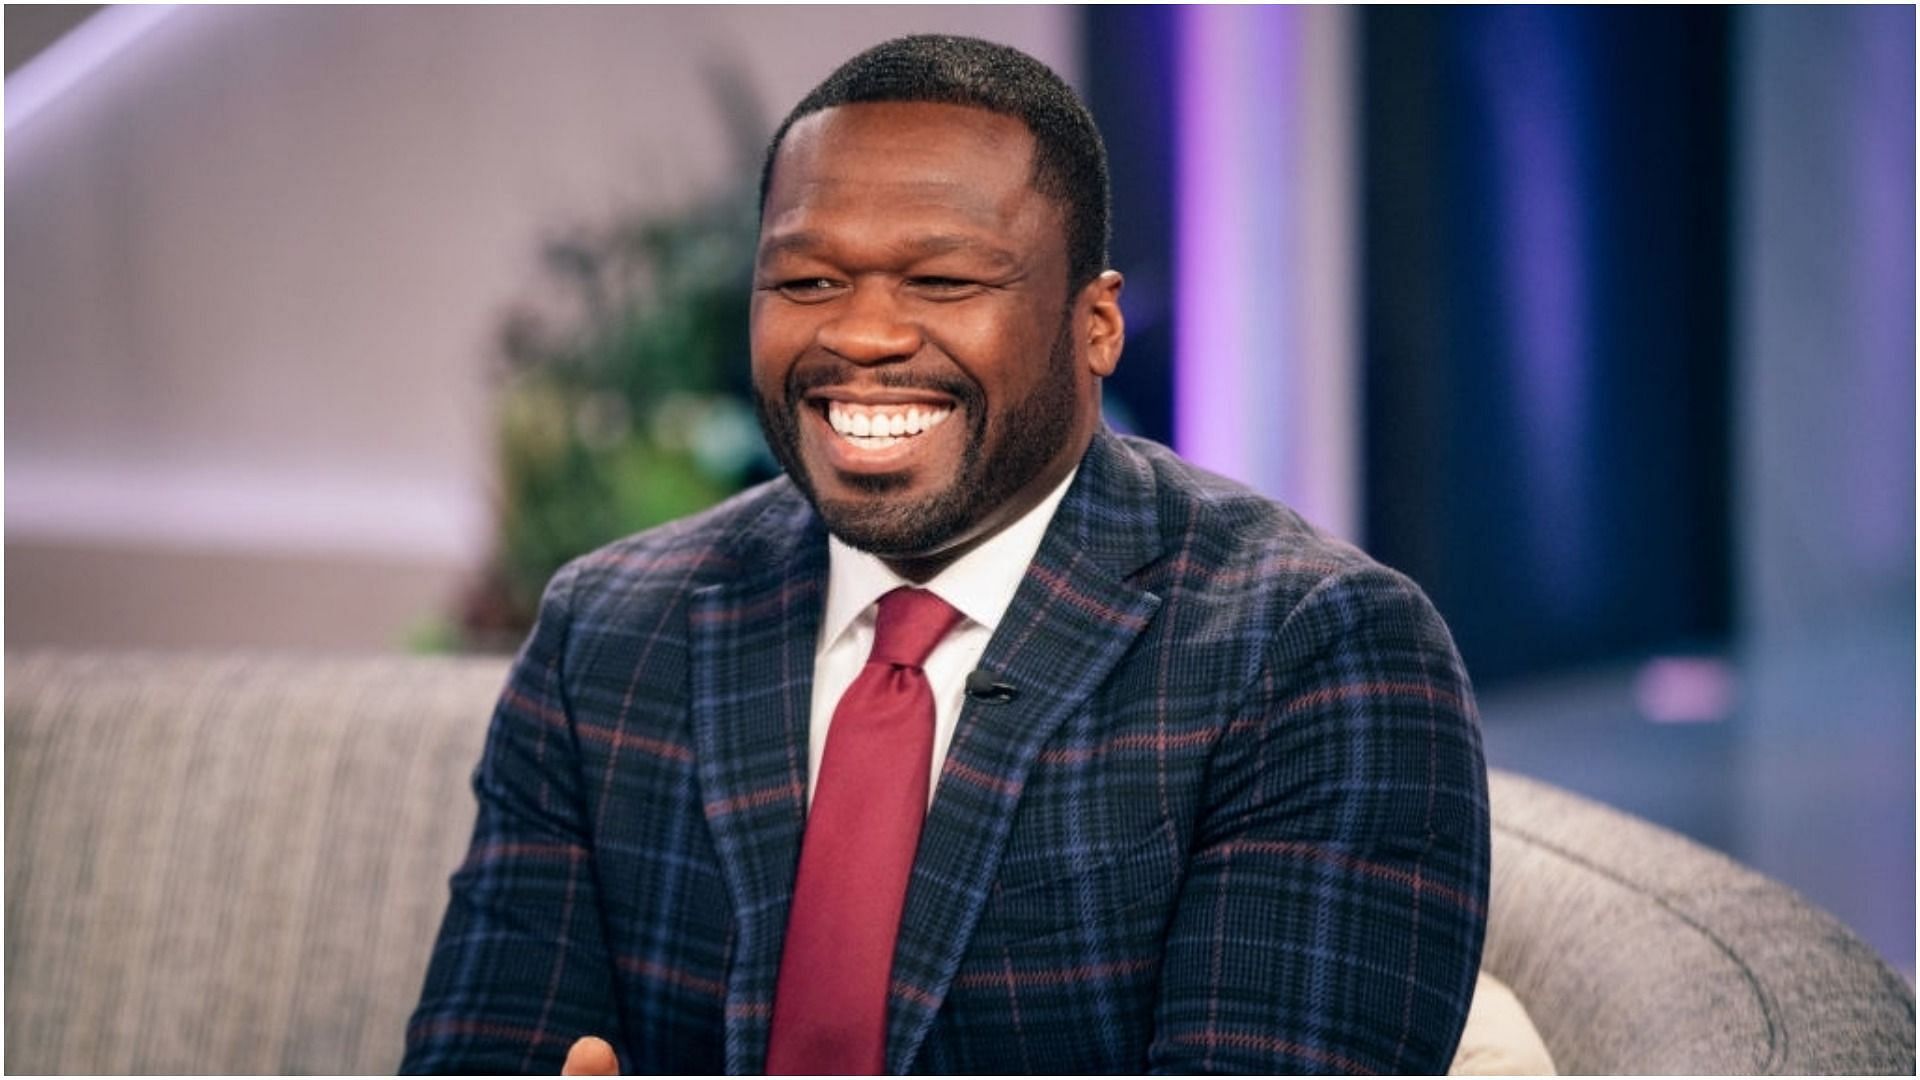 50 Cent&#039;s appearance at the Super Bowl 2022 gained the attention of the internet (Image via Weiss Eubanks/Getty Images)